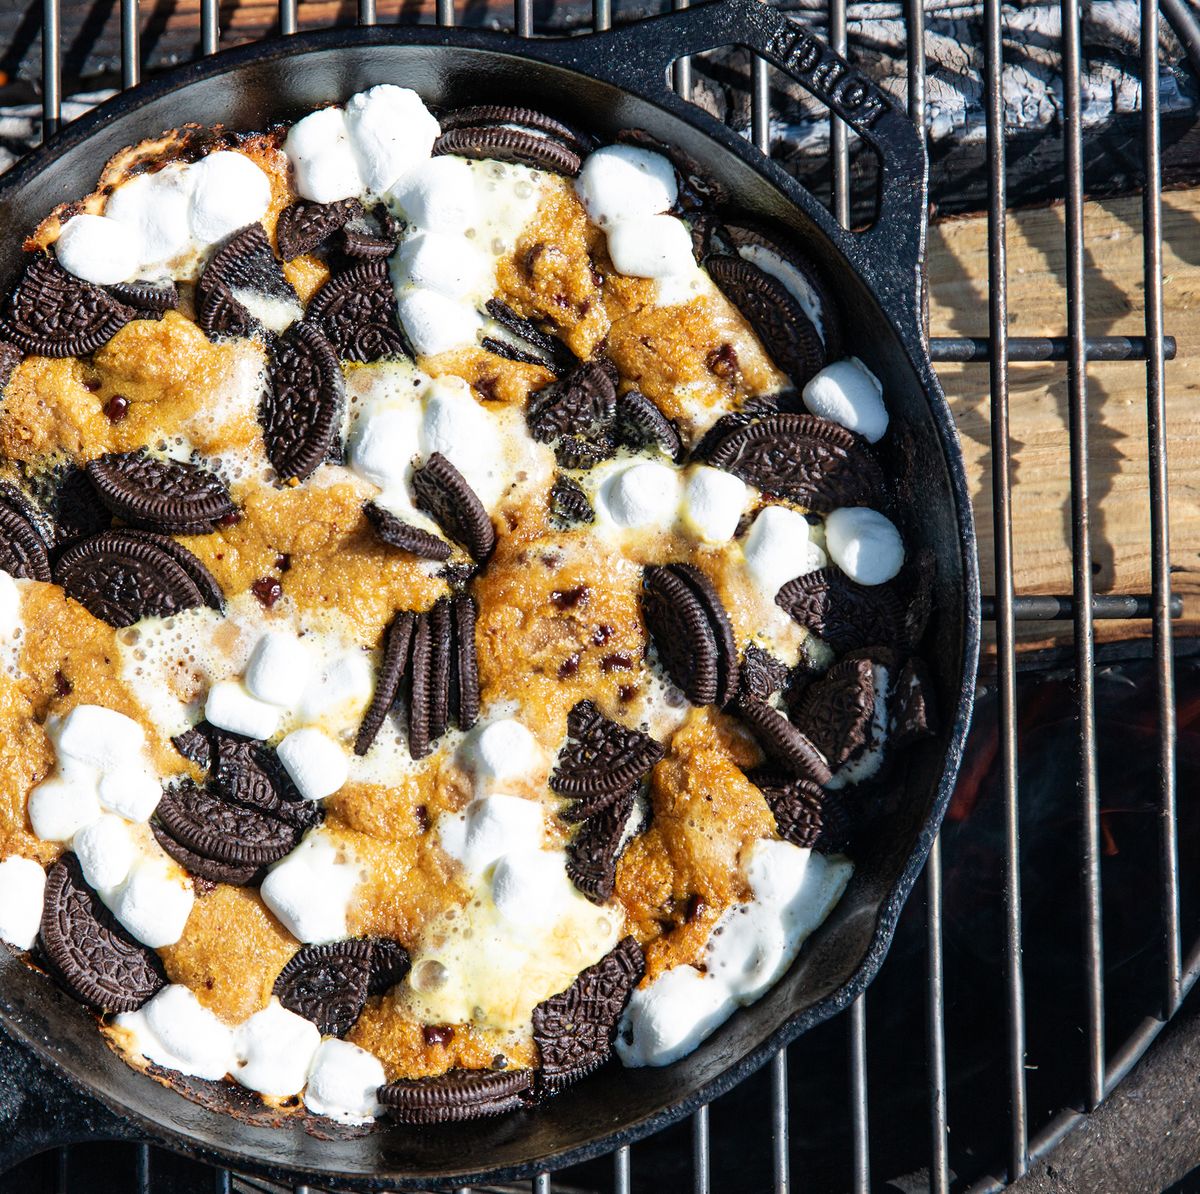 https://hips.hearstapps.com/hmg-prod/images/20210404-ehg-delish-cookie-dough-smores-skillet00010-1622595315.jpg?crop=0.670xw:1.00xh;0.0401xw,0&resize=1200:*